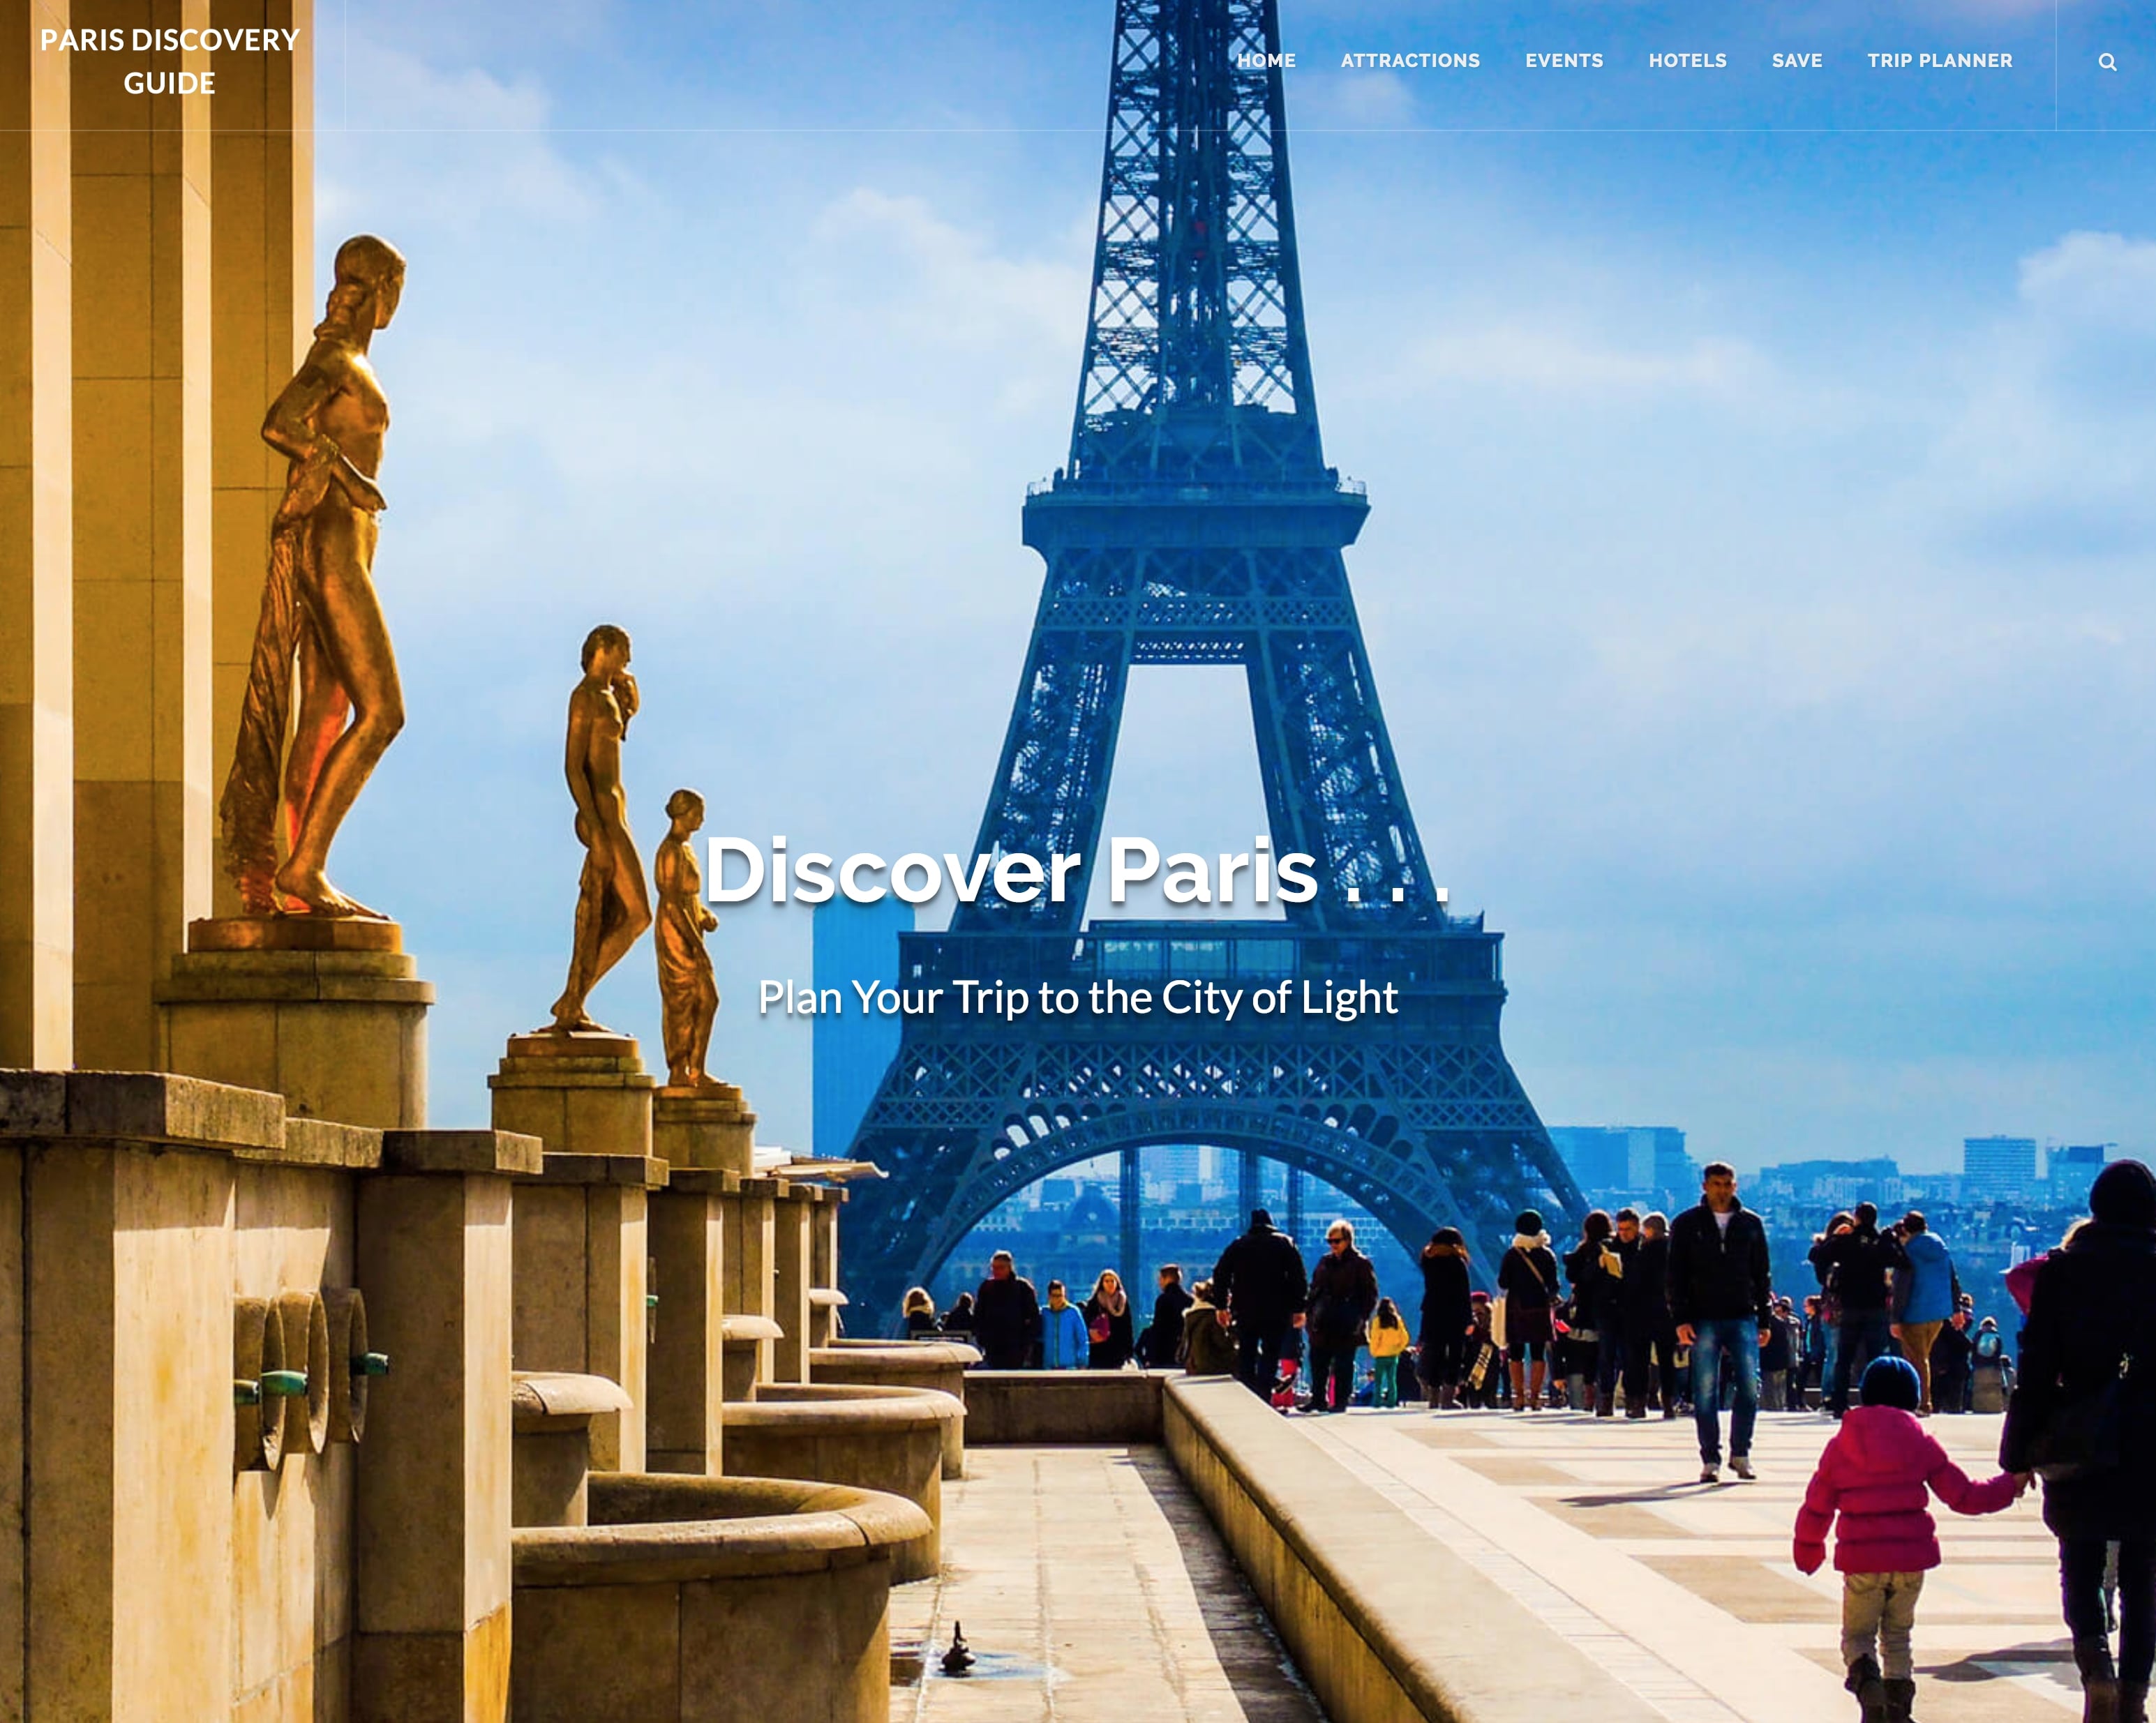 Paris Discovery Guide Home Page